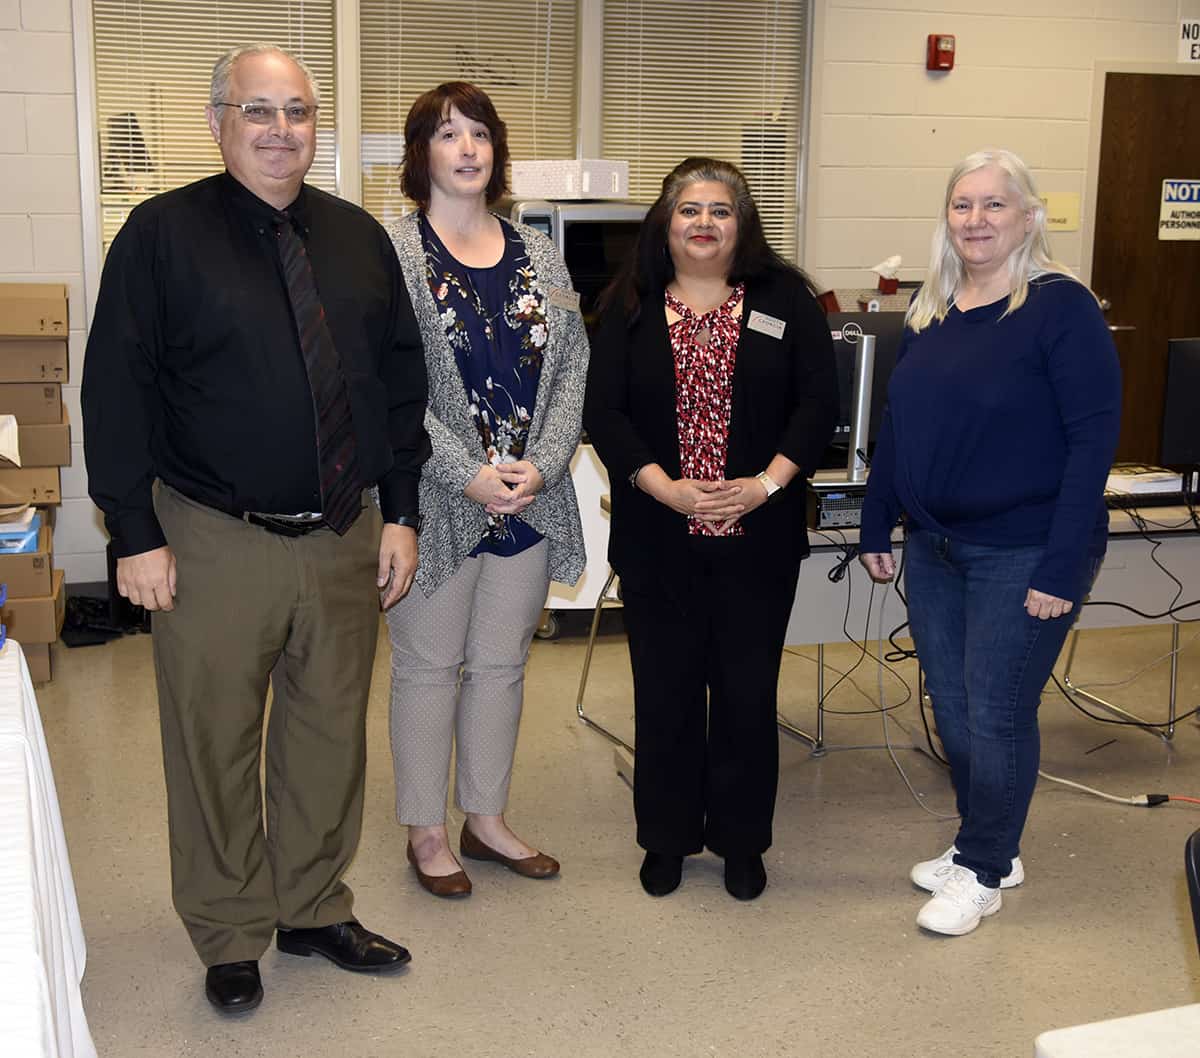 Pictured left to right are SGTC Academic Dean Dr. David Finley, Drafting instructor Kristie Hudson, WIOA Coordinator Sandhya Muljibhai, and Cooper Lighting Lead Designer Teresa Crawford at a recent meeting of the SGTC Drafting program advisory committee.